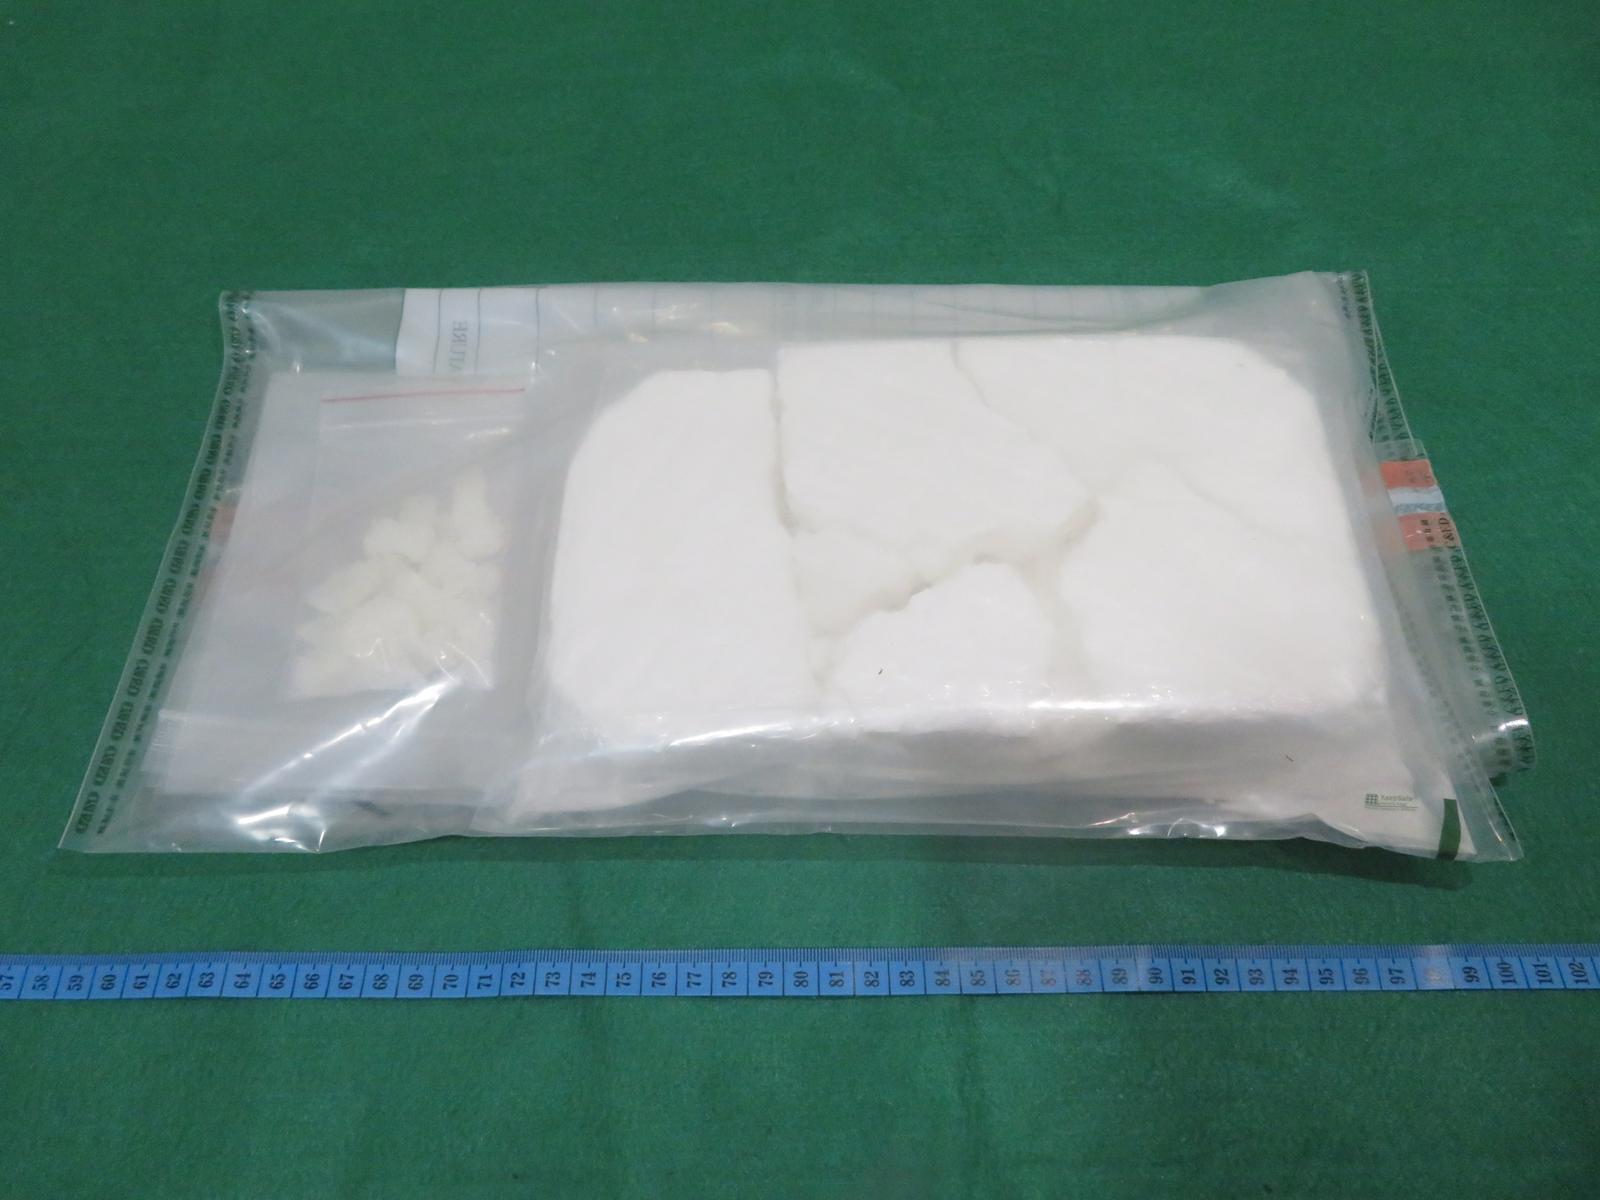 Hong Kong Customs today (April 19) seized about 1.1 kilograms of suspected cocaine and about 25 grams of suspected crack cocaine with a total estimated market value of about $1.1 million in Tsuen Wan. Photo shows the suspected dangerous drugs seized.